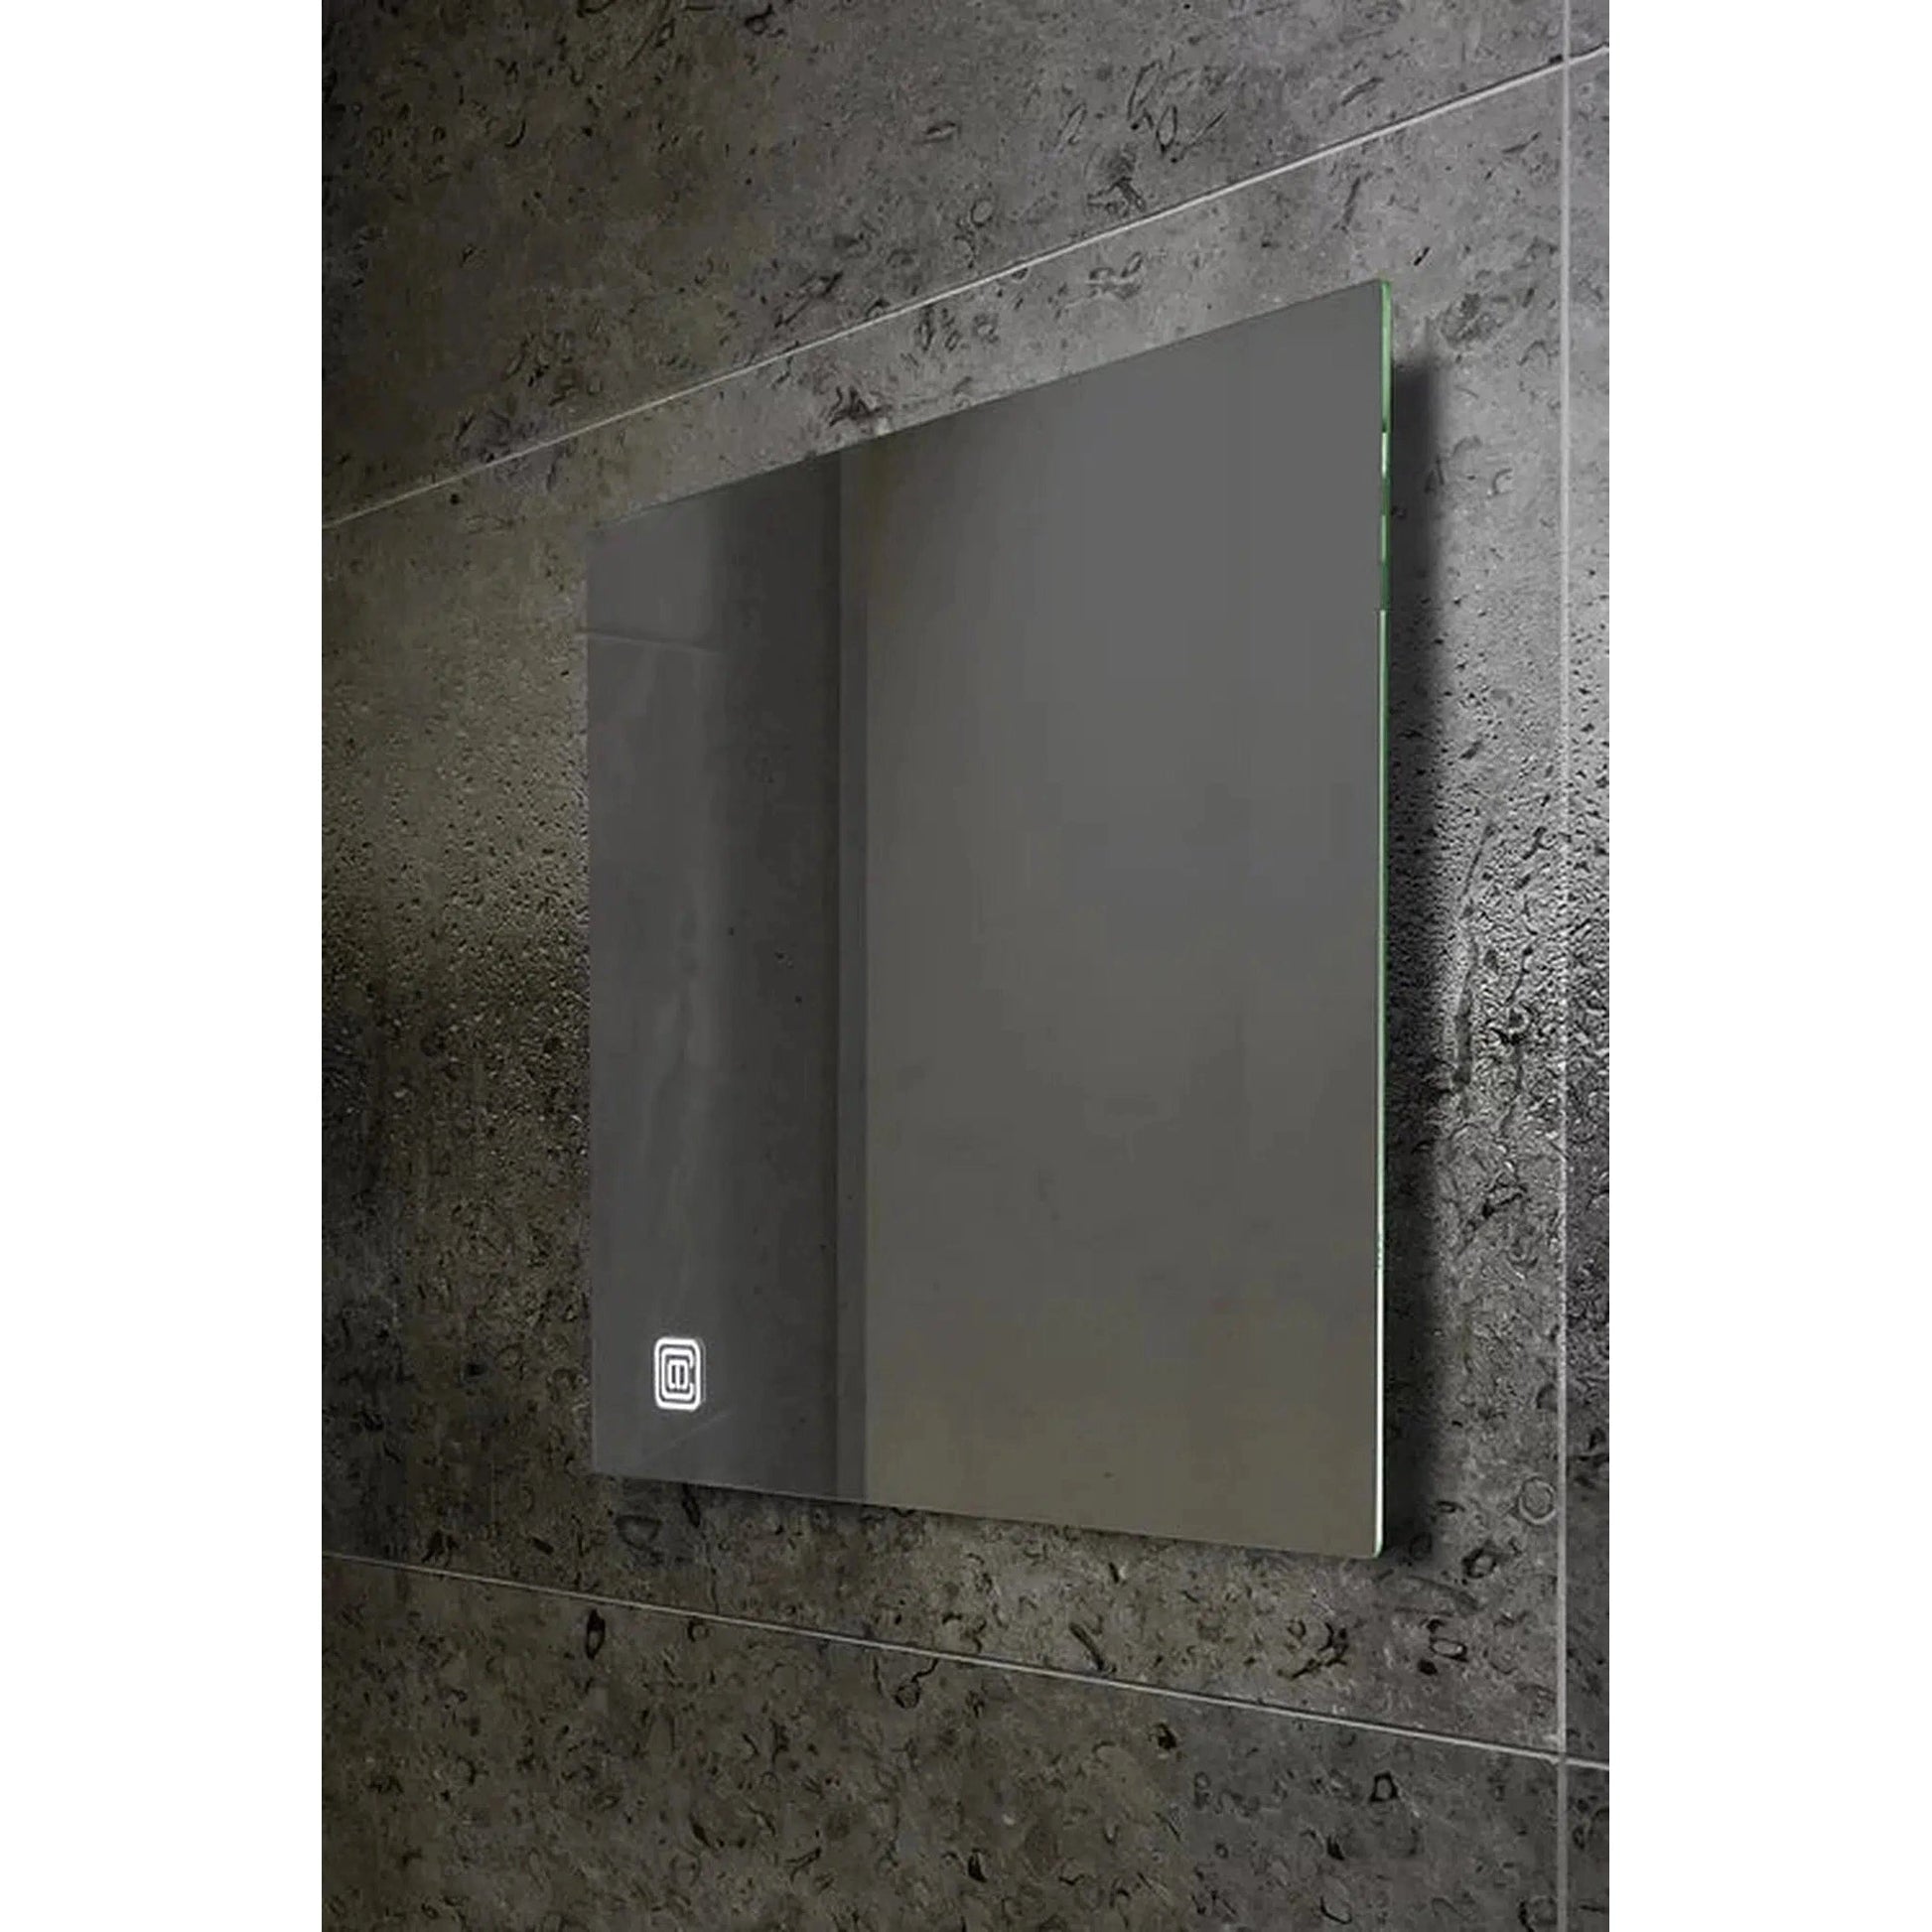 ClearMirror Clarity 12" x 12" Fog-Free Wall-Mount Shower Mirror With LED Touch Sensor and Heating Pad